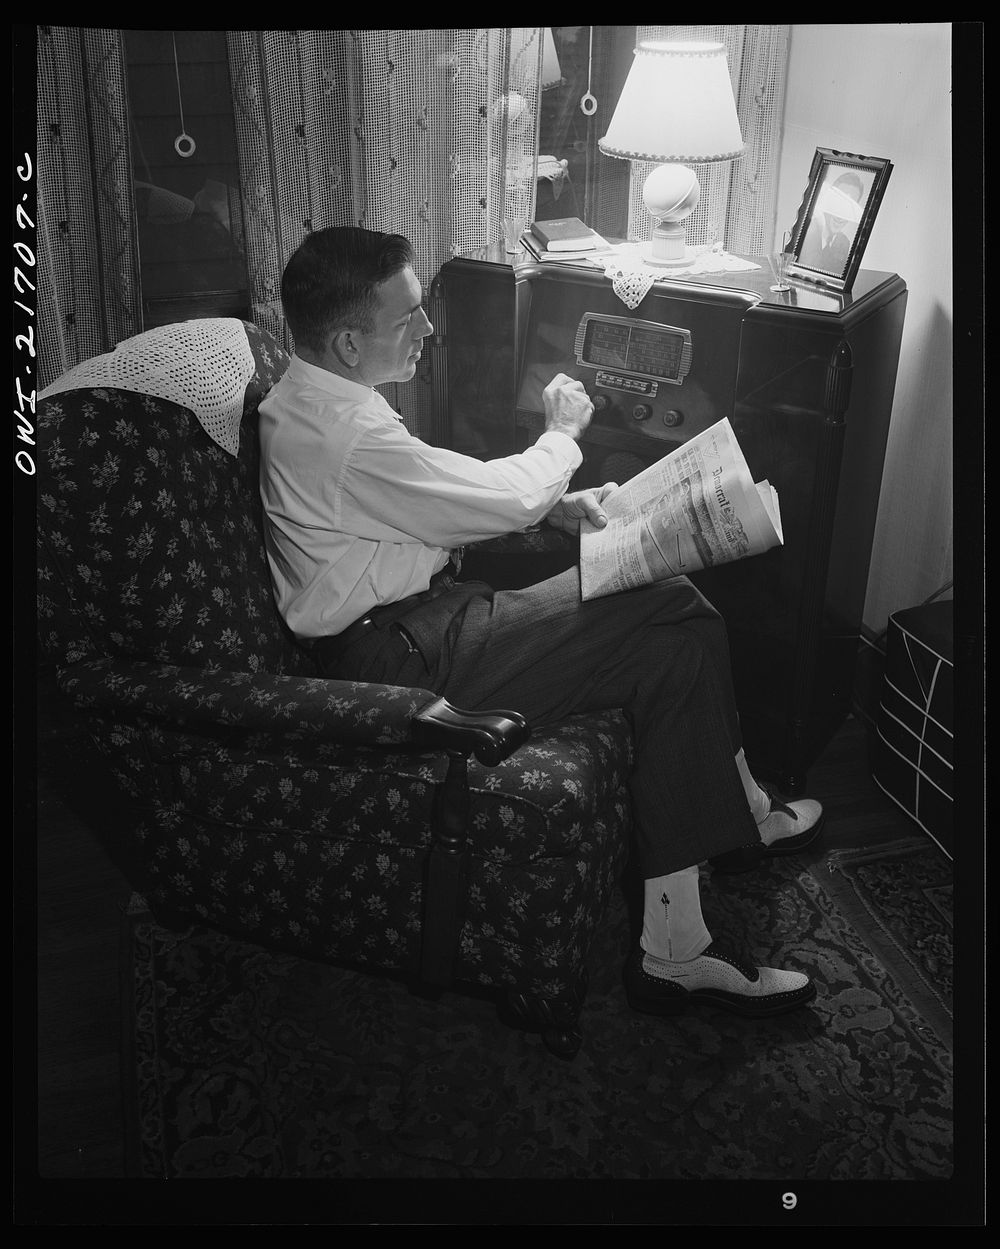 Rochester, New York. Mr. Babcock tuning in for war news. Sourced from the Library of Congress.